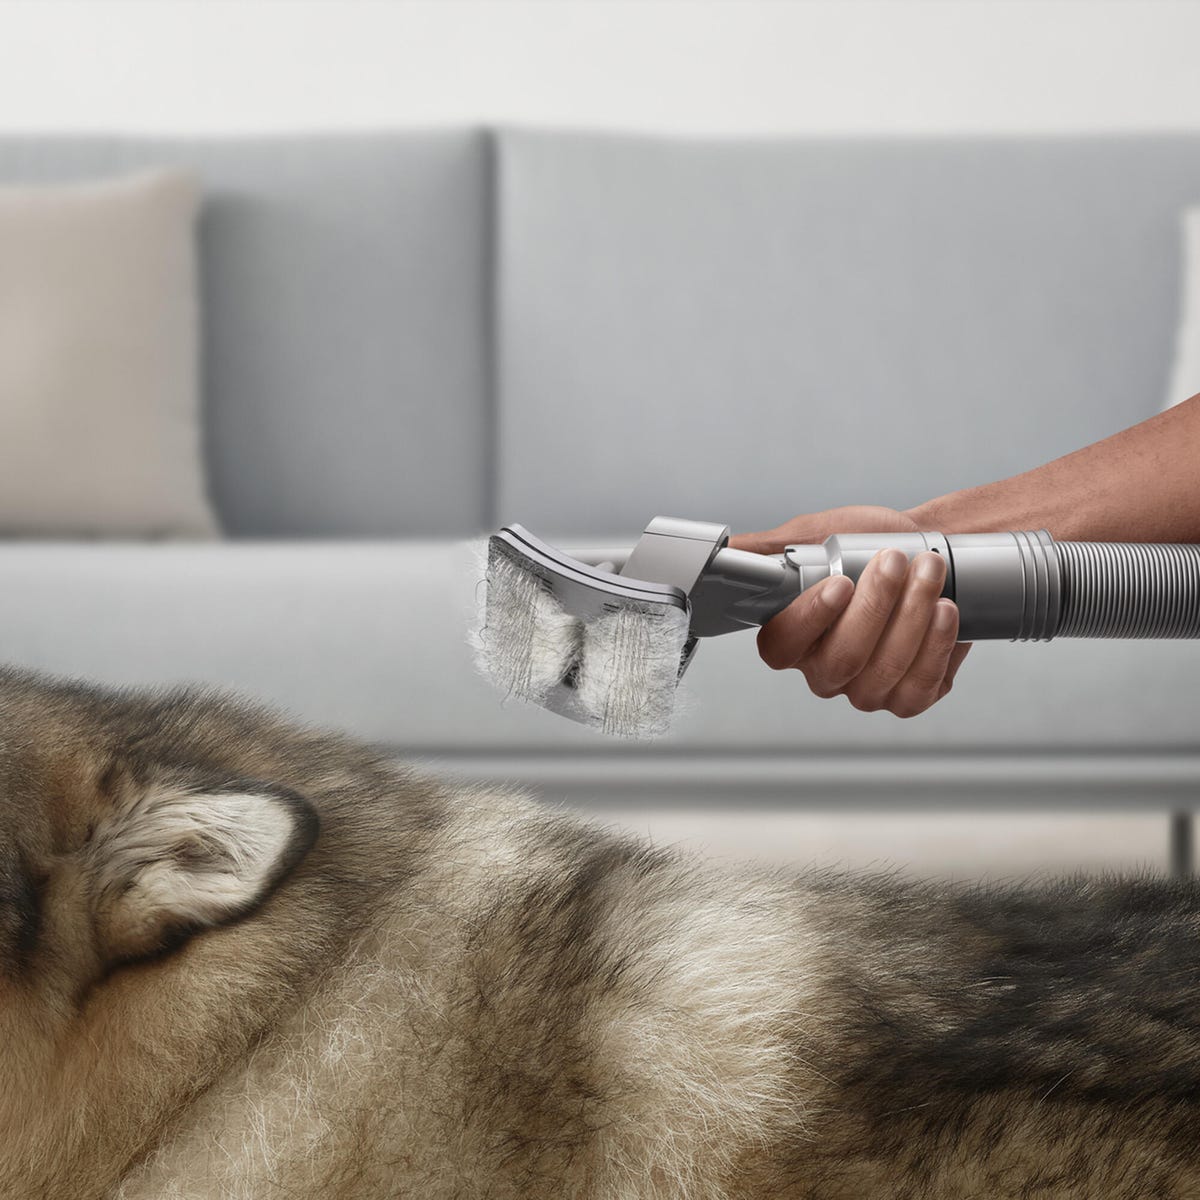 The pet-grooming kit attachment for Dyson vacuums